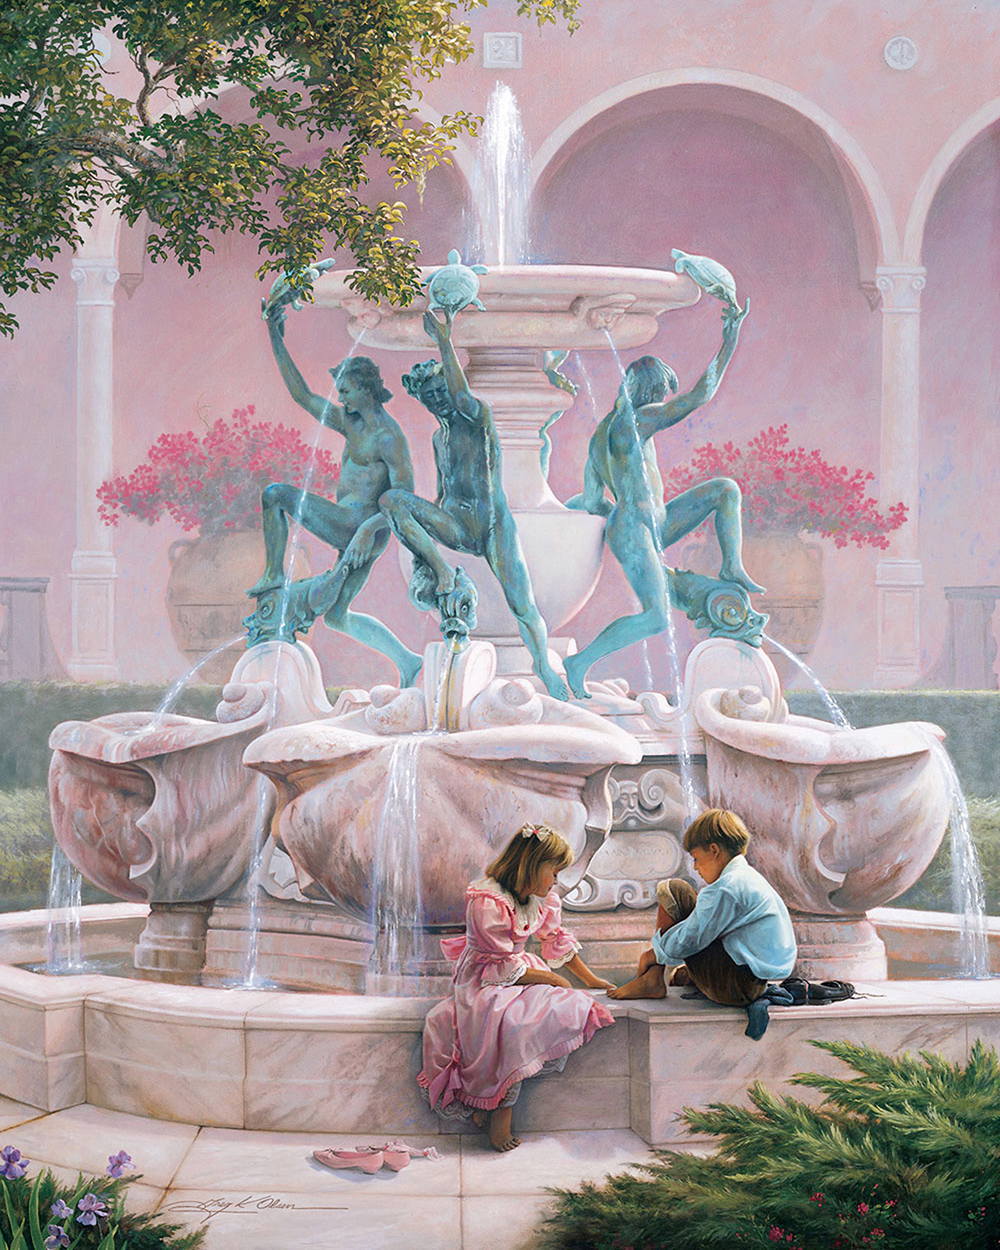 Fountains of My Youth by Greg Olsen